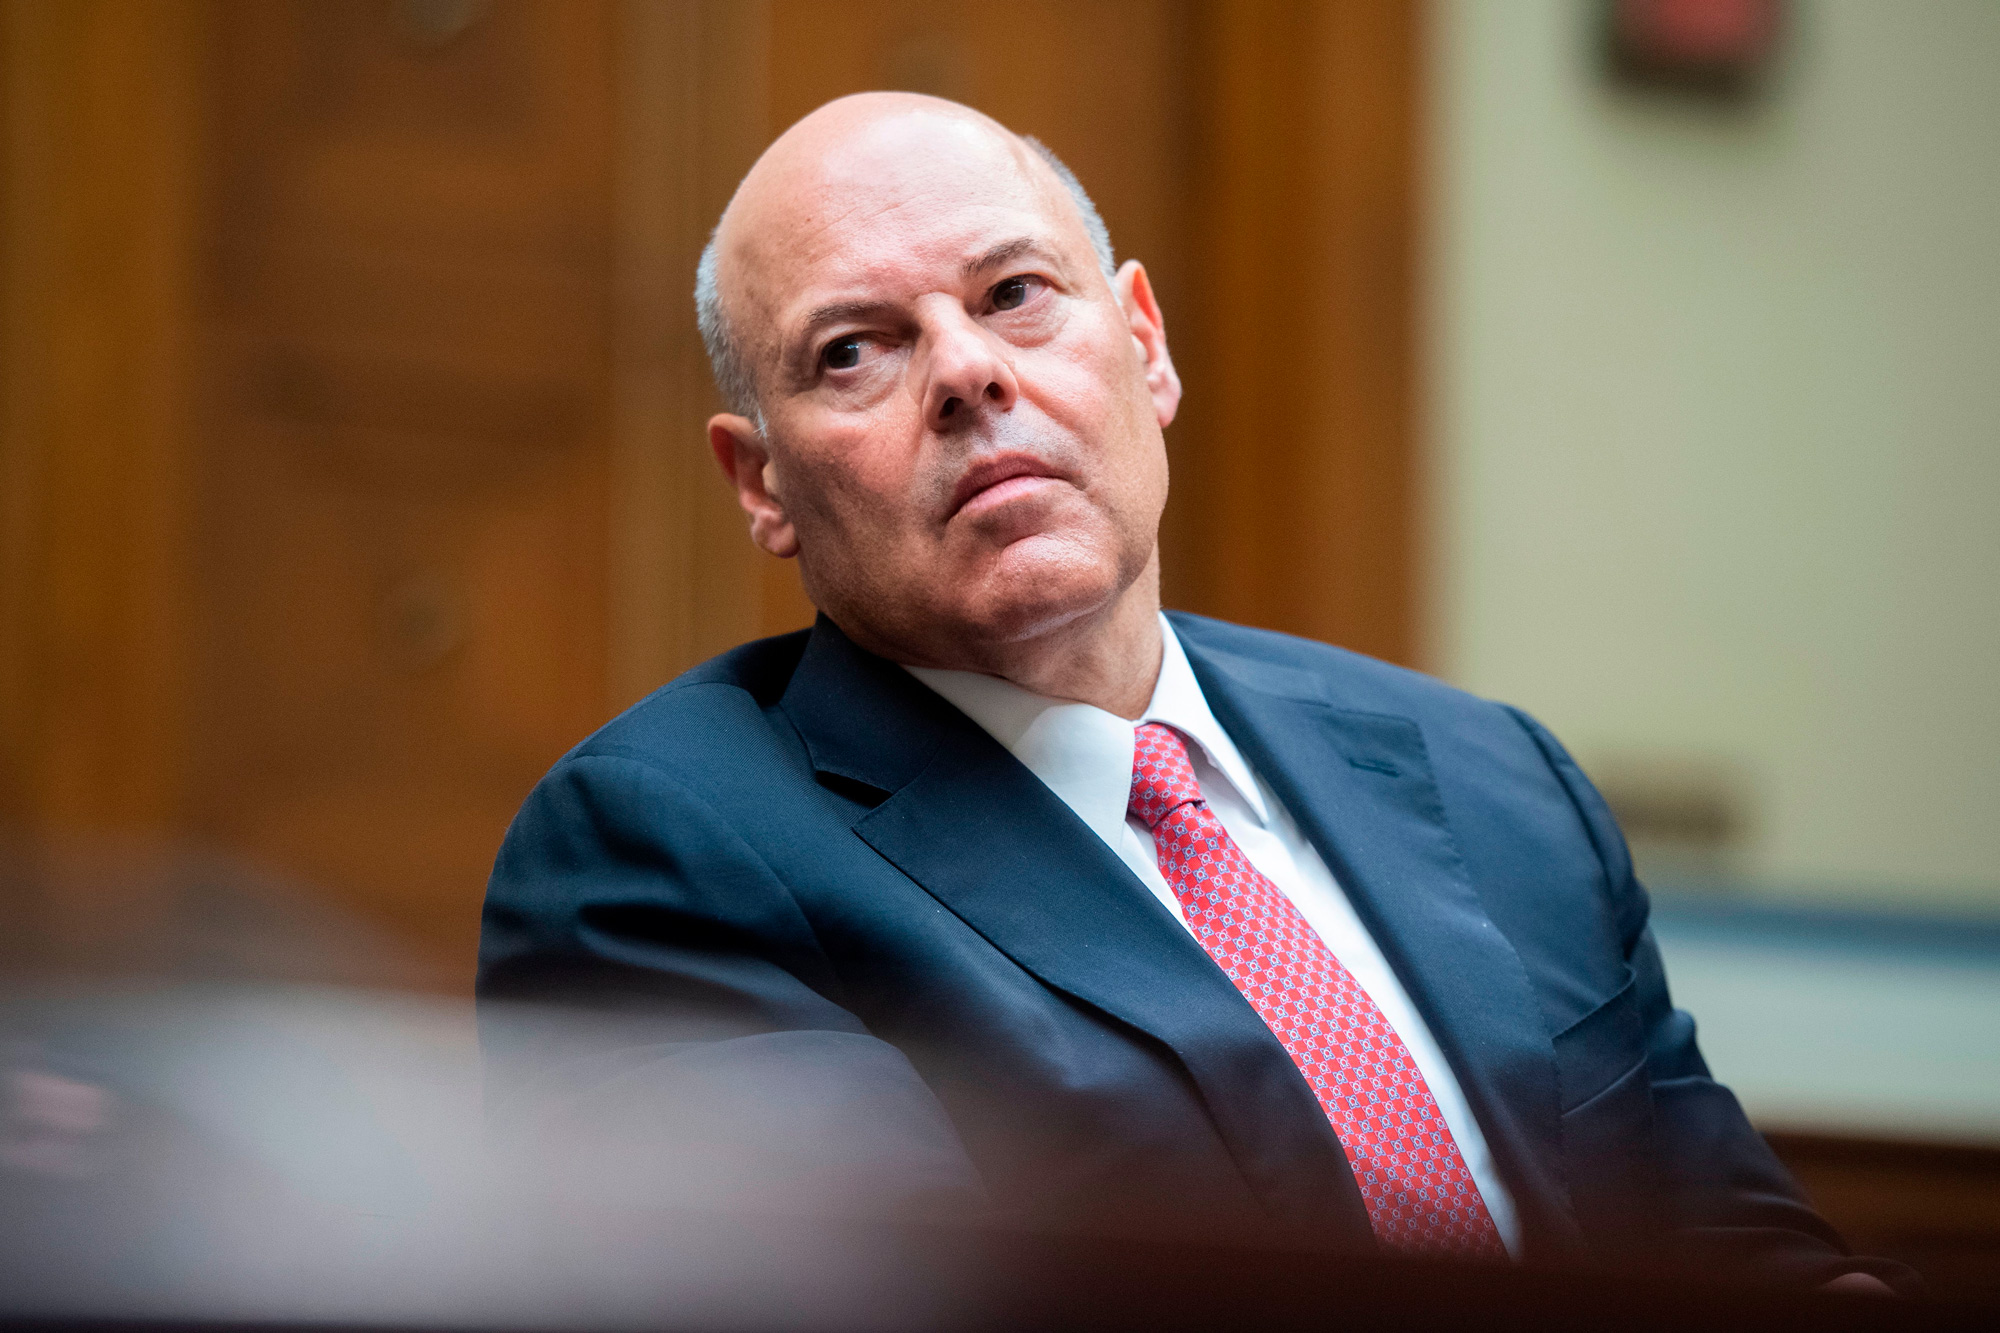 US Postmaster General Louis DeJoy testifies during a House Oversight and Reform Committee hearing on Capitol Hill in Washington, DC, on August 24.